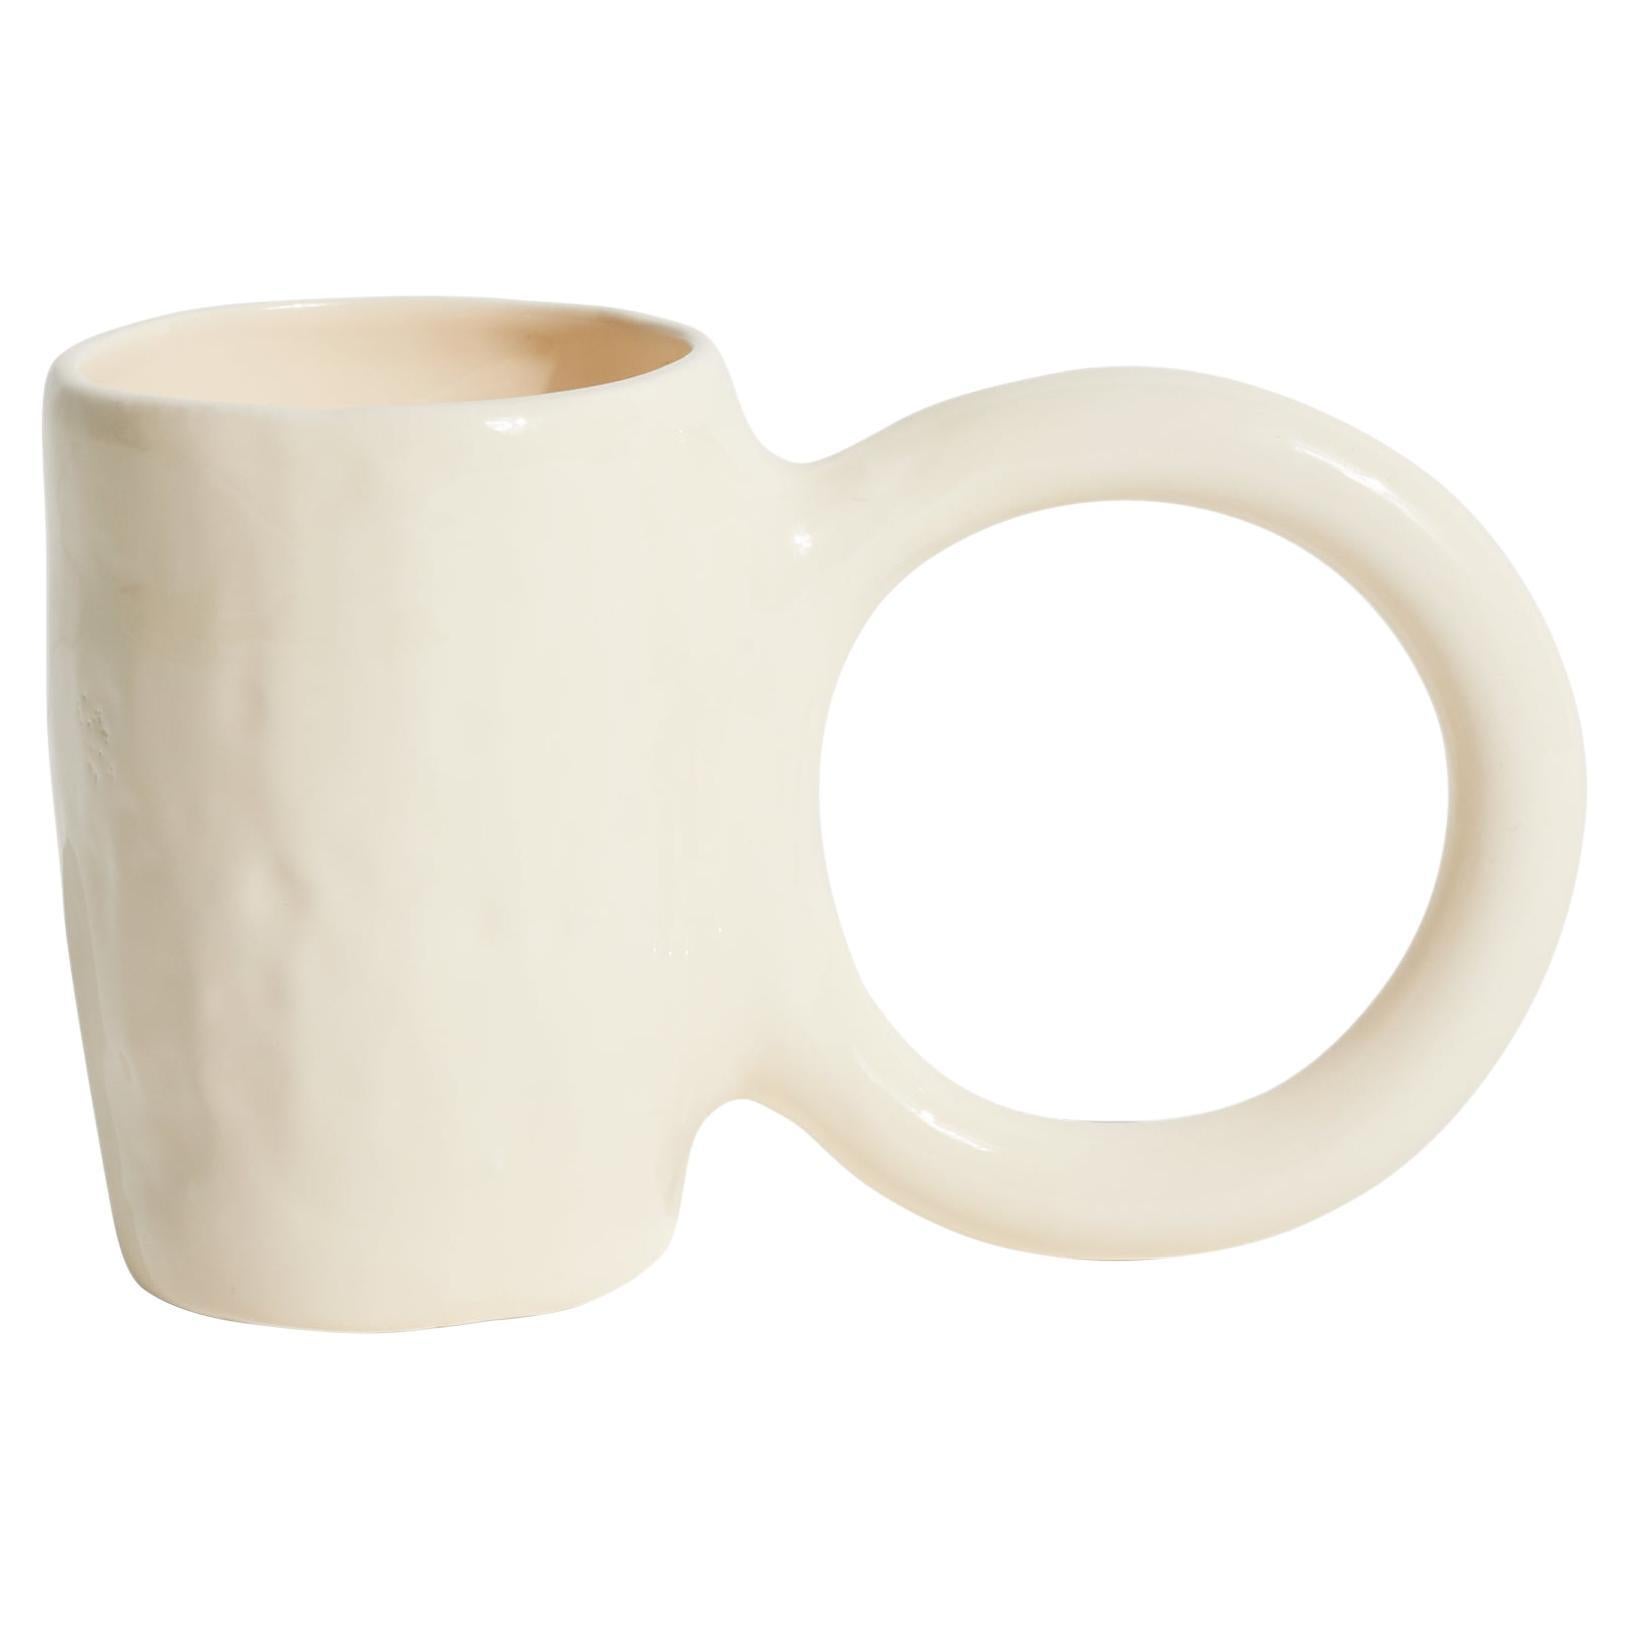 PETITE FRITURE Donut, Large Mug, Vanilla, Designed by Pia Chevalier For Sale